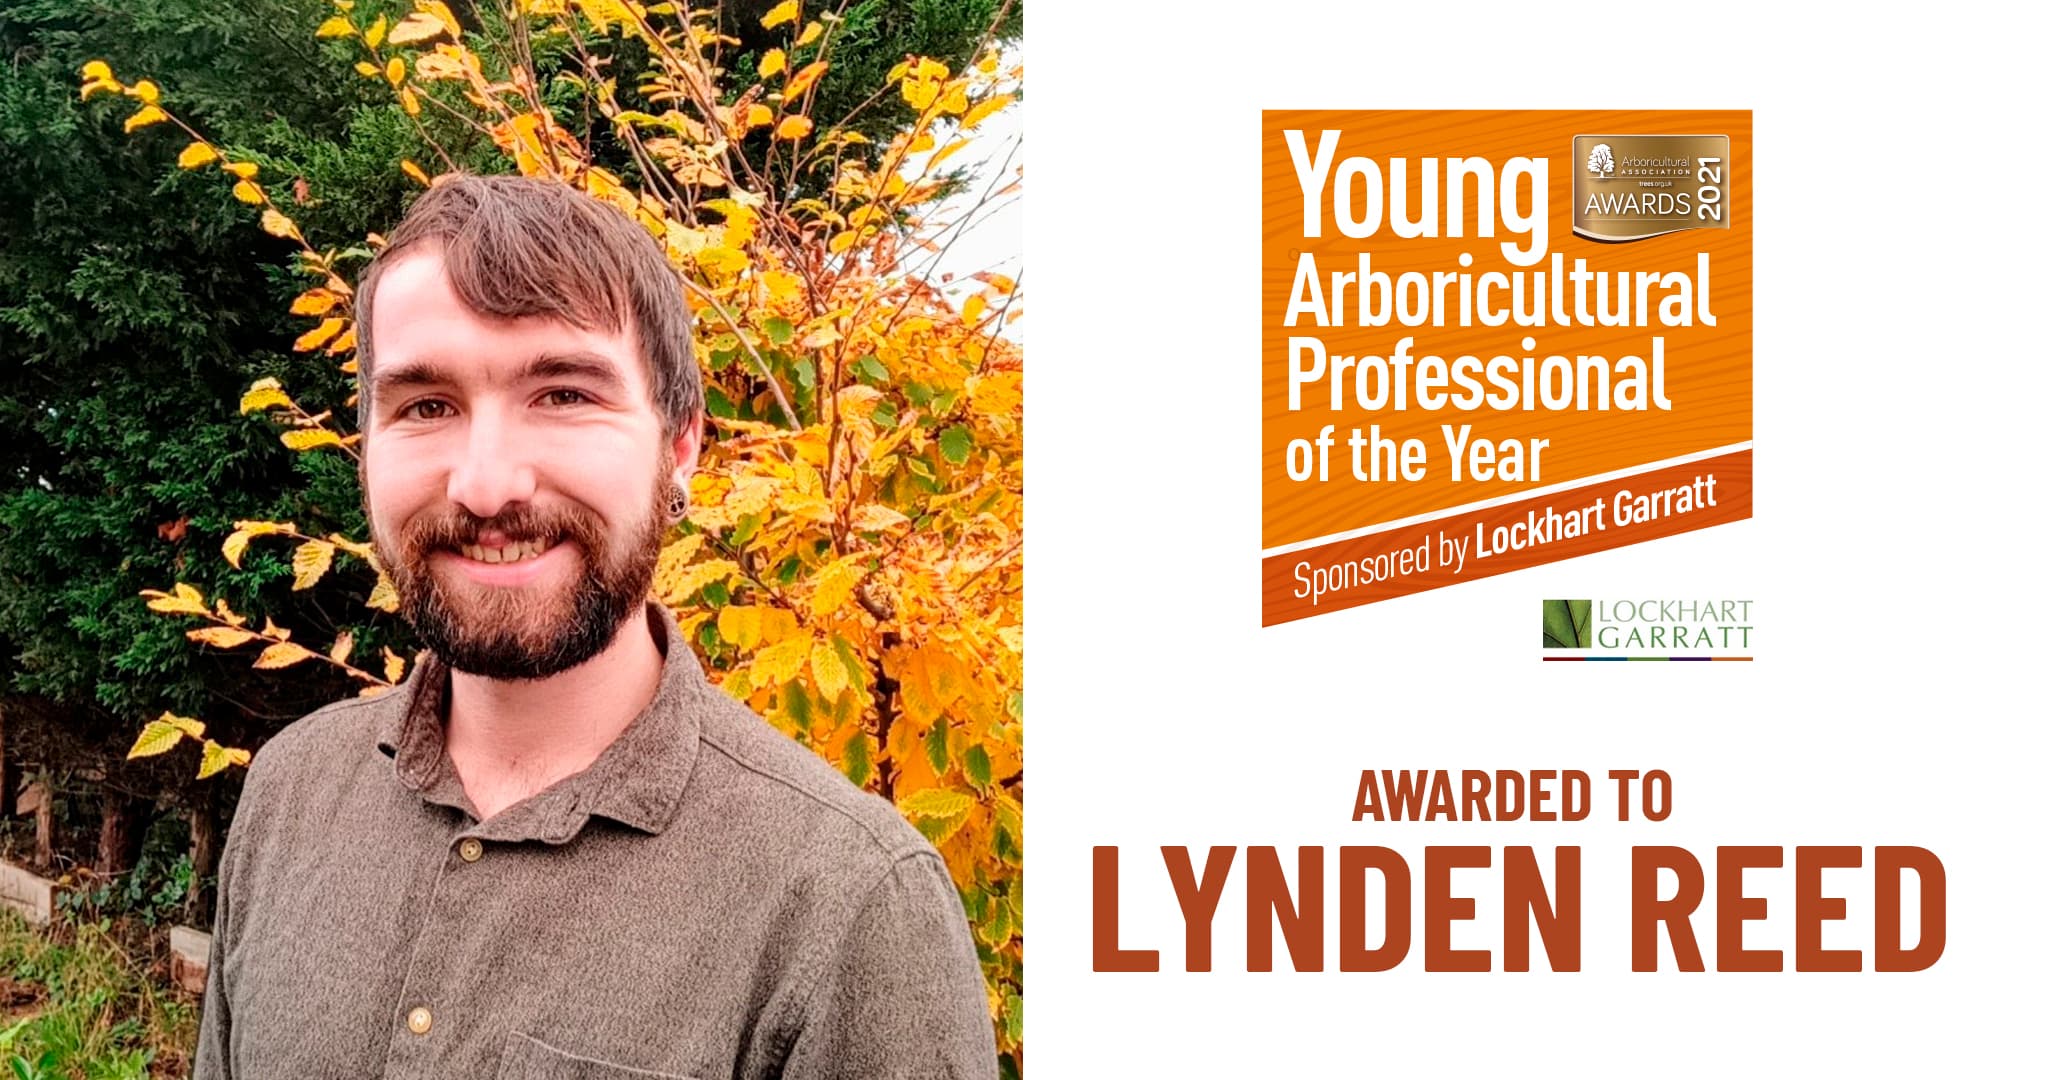 Lynden Reed awarded the AA Young Arboricultural Professional of the Year Award 2021